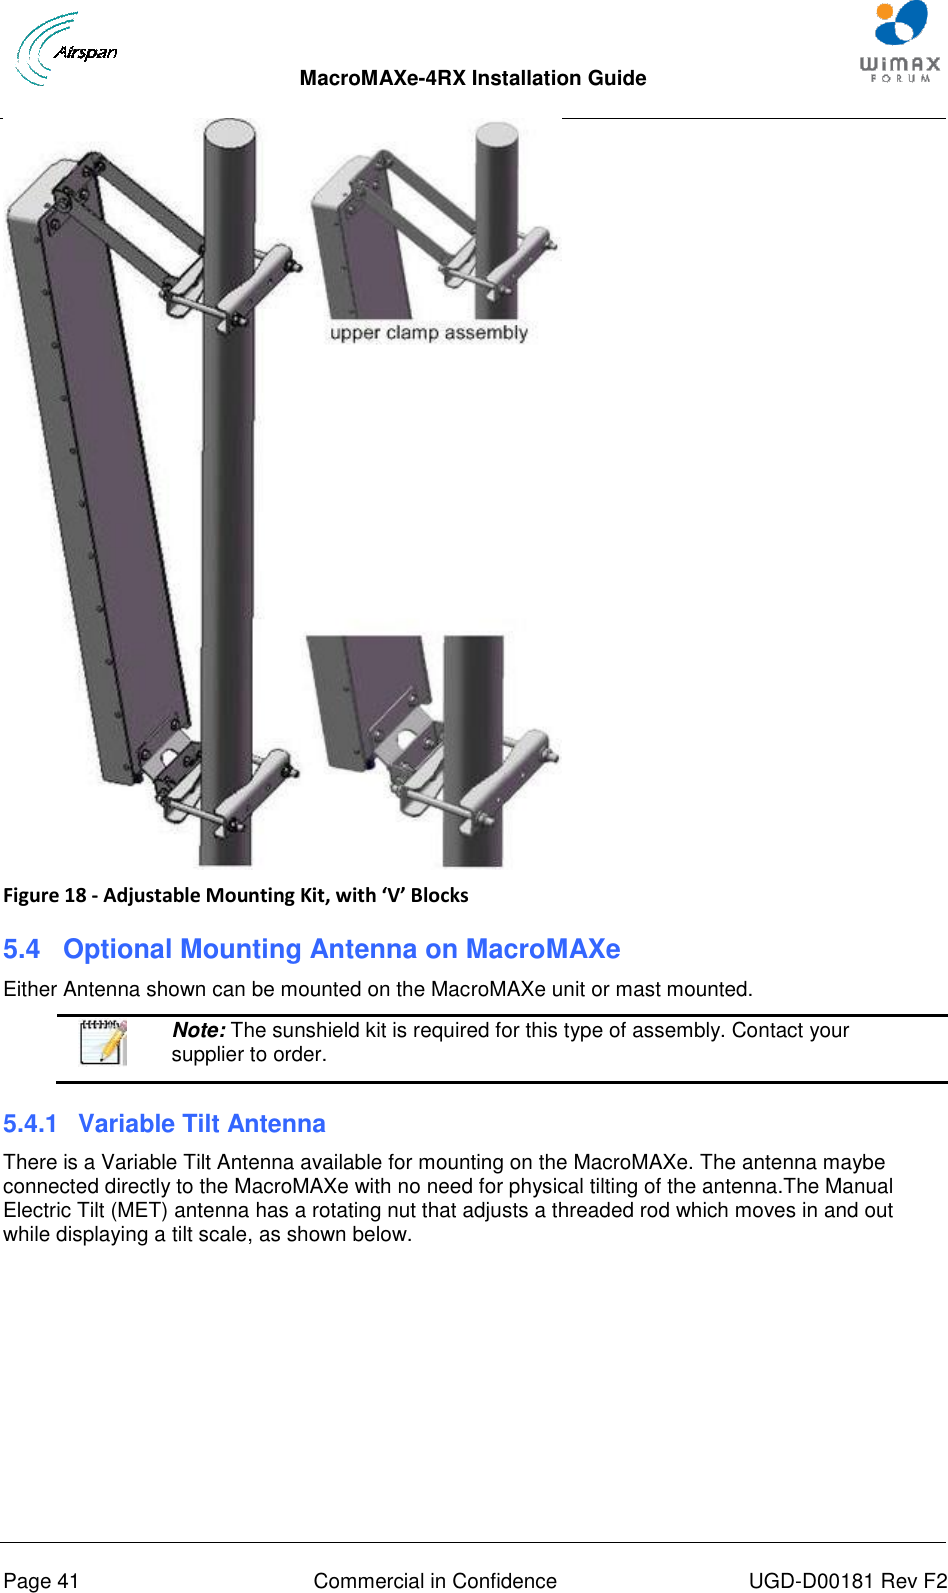  MacroMAXe-4RX Installation Guide       Page 41  Commercial in Confidence  UGD-D00181 Rev F2  Figure 18 - Adjustable Mounting Kit, with ‘V’ Blocks 5.4  Optional Mounting Antenna on MacroMAXe Either Antenna shown can be mounted on the MacroMAXe unit or mast mounted.   Note: The sunshield kit is required for this type of assembly. Contact your supplier to order. 5.4.1  Variable Tilt Antenna There is a Variable Tilt Antenna available for mounting on the MacroMAXe. The antenna maybe connected directly to the MacroMAXe with no need for physical tilting of the antenna.The Manual Electric Tilt (MET) antenna has a rotating nut that adjusts a threaded rod which moves in and out while displaying a tilt scale, as shown below. 